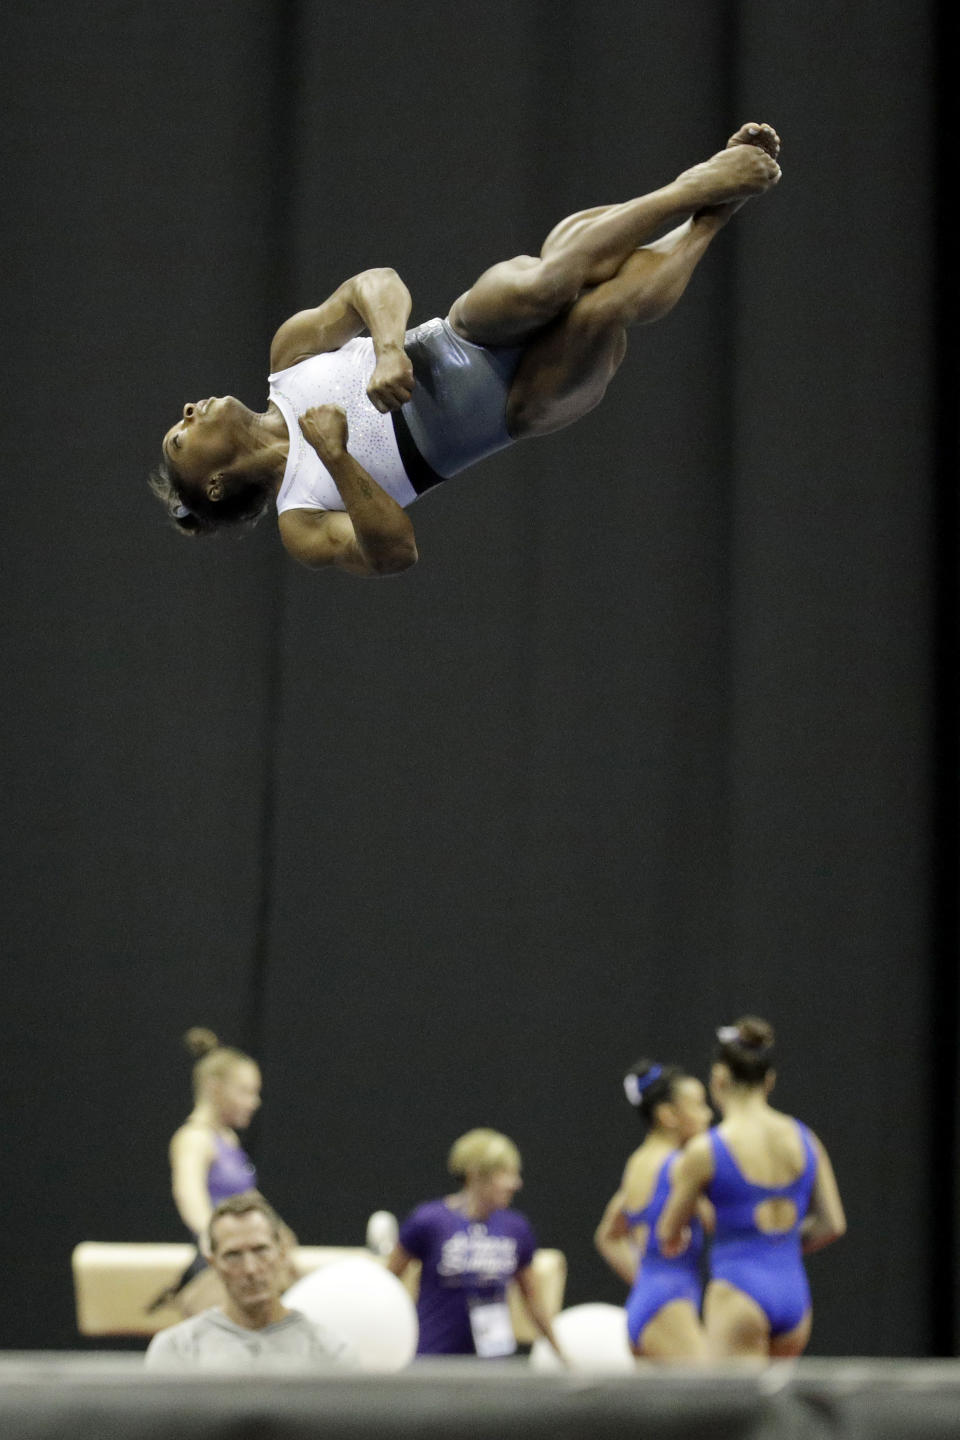 Simone Biles works on her floor exercise routine during practice for the U.S. Gymnastics Championships Wednesday, Aug. 7, 2019, in Kansas City, Mo. (AP Photo/Charlie Riedel)